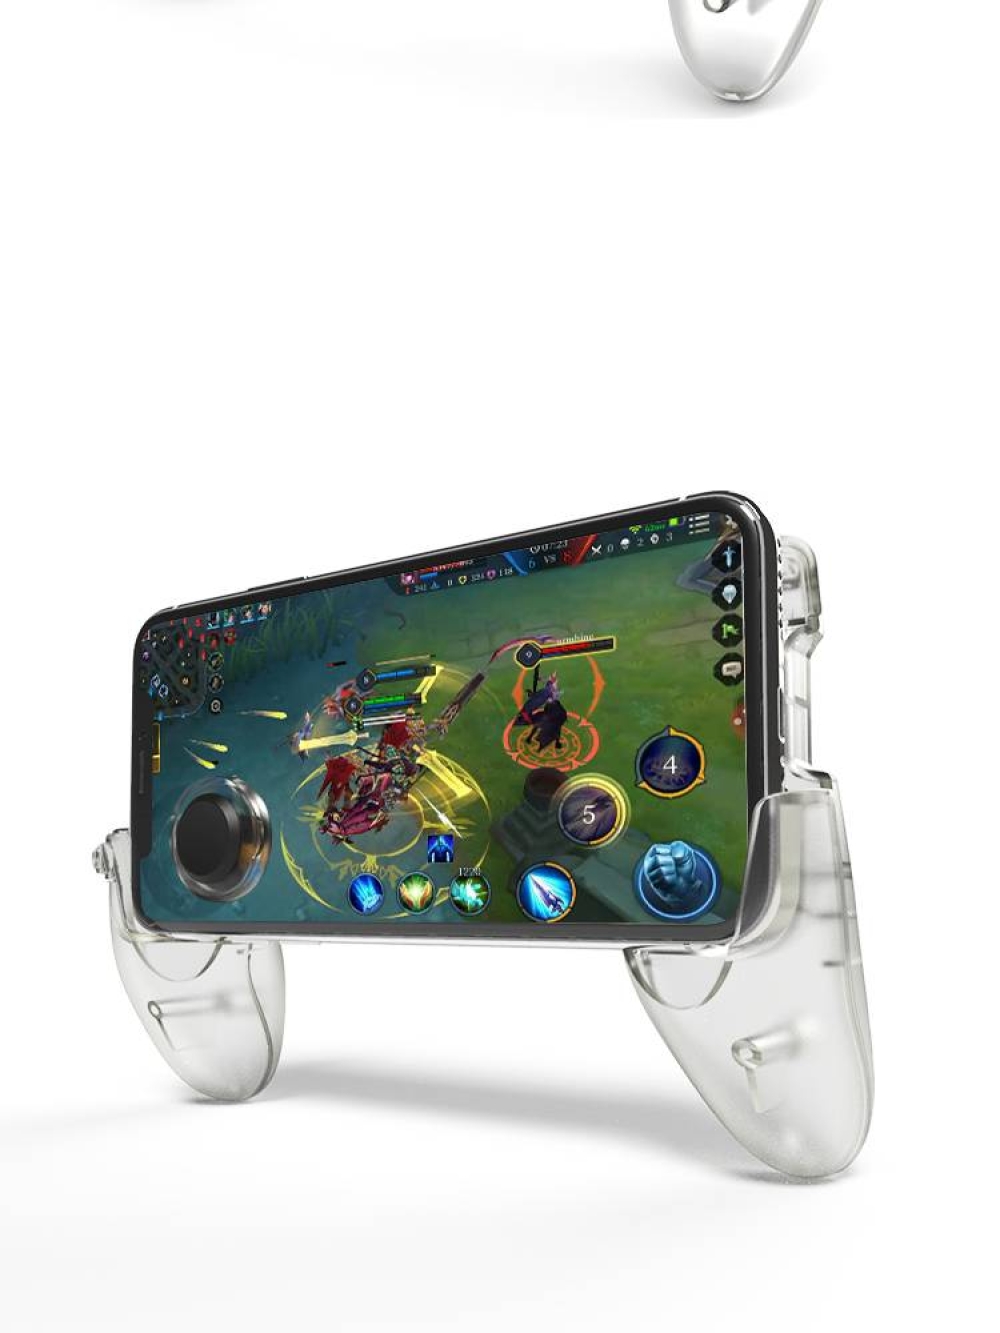 Best Mobile Gaming Controller with Stand